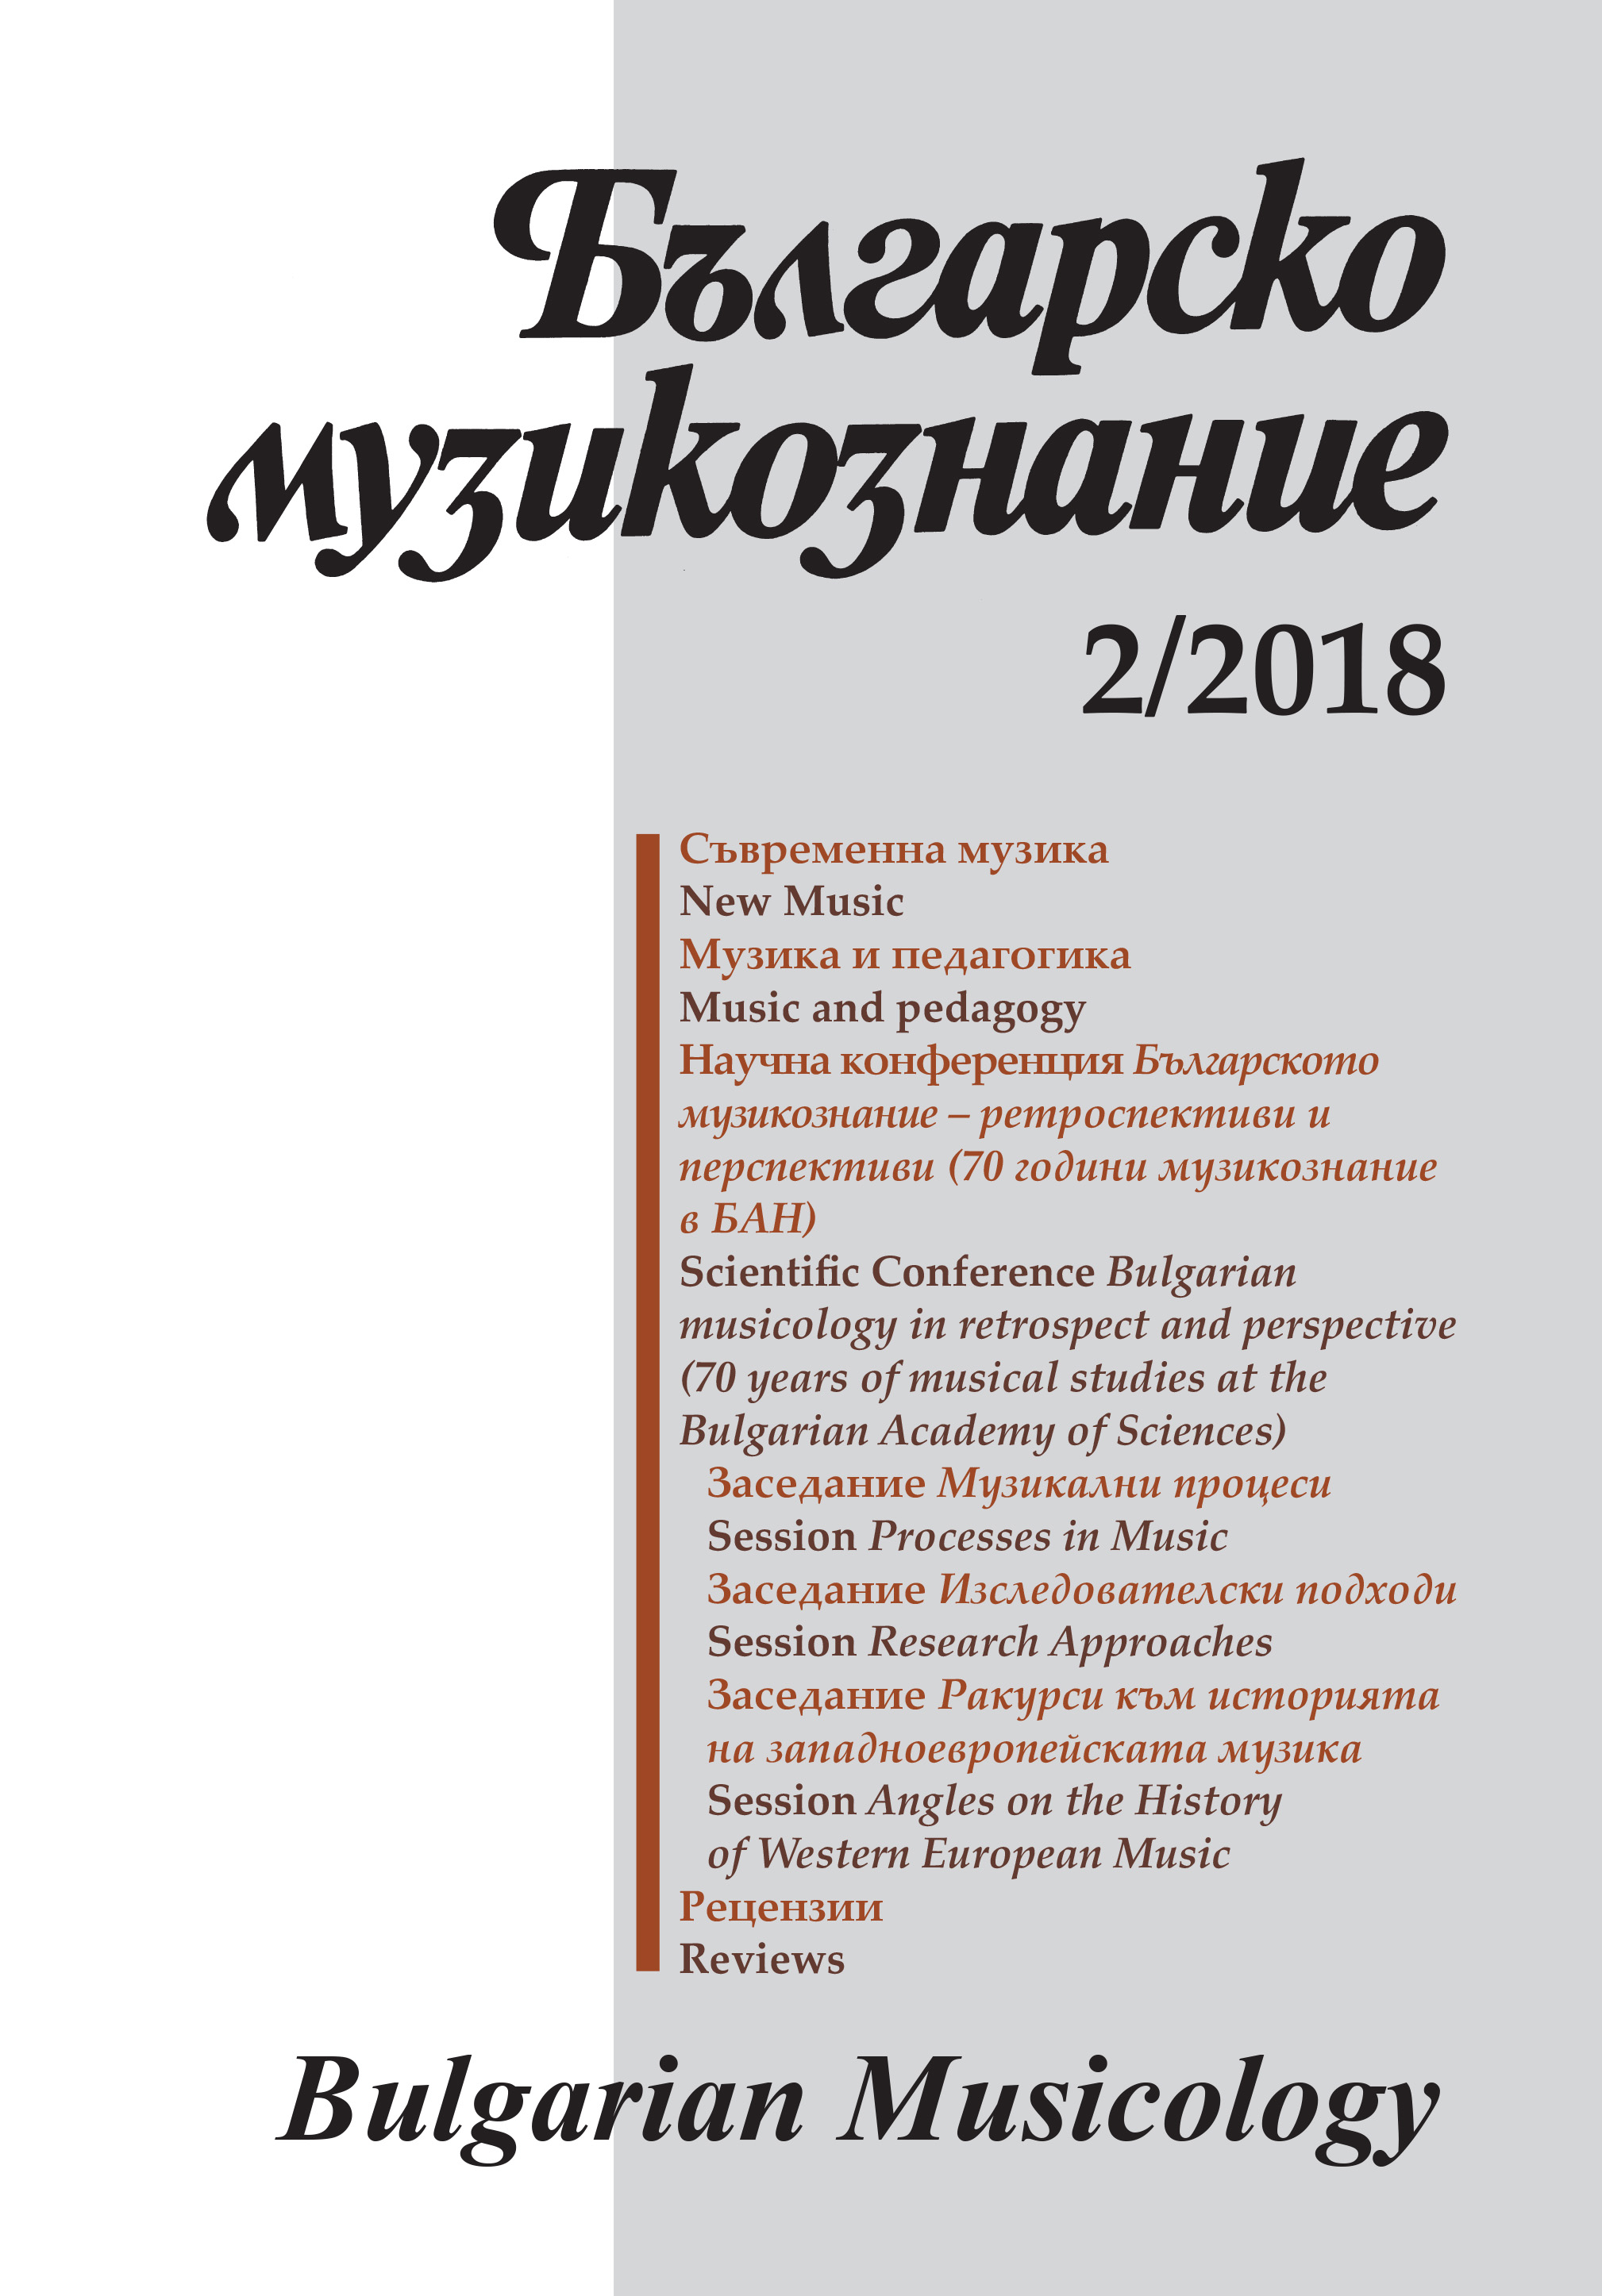 Music analysis in Bulgaria in the light of the twenty-first century: Ideas and topical academic outlines of this research area in Tomi Karklisiyski’s studies Cover Image